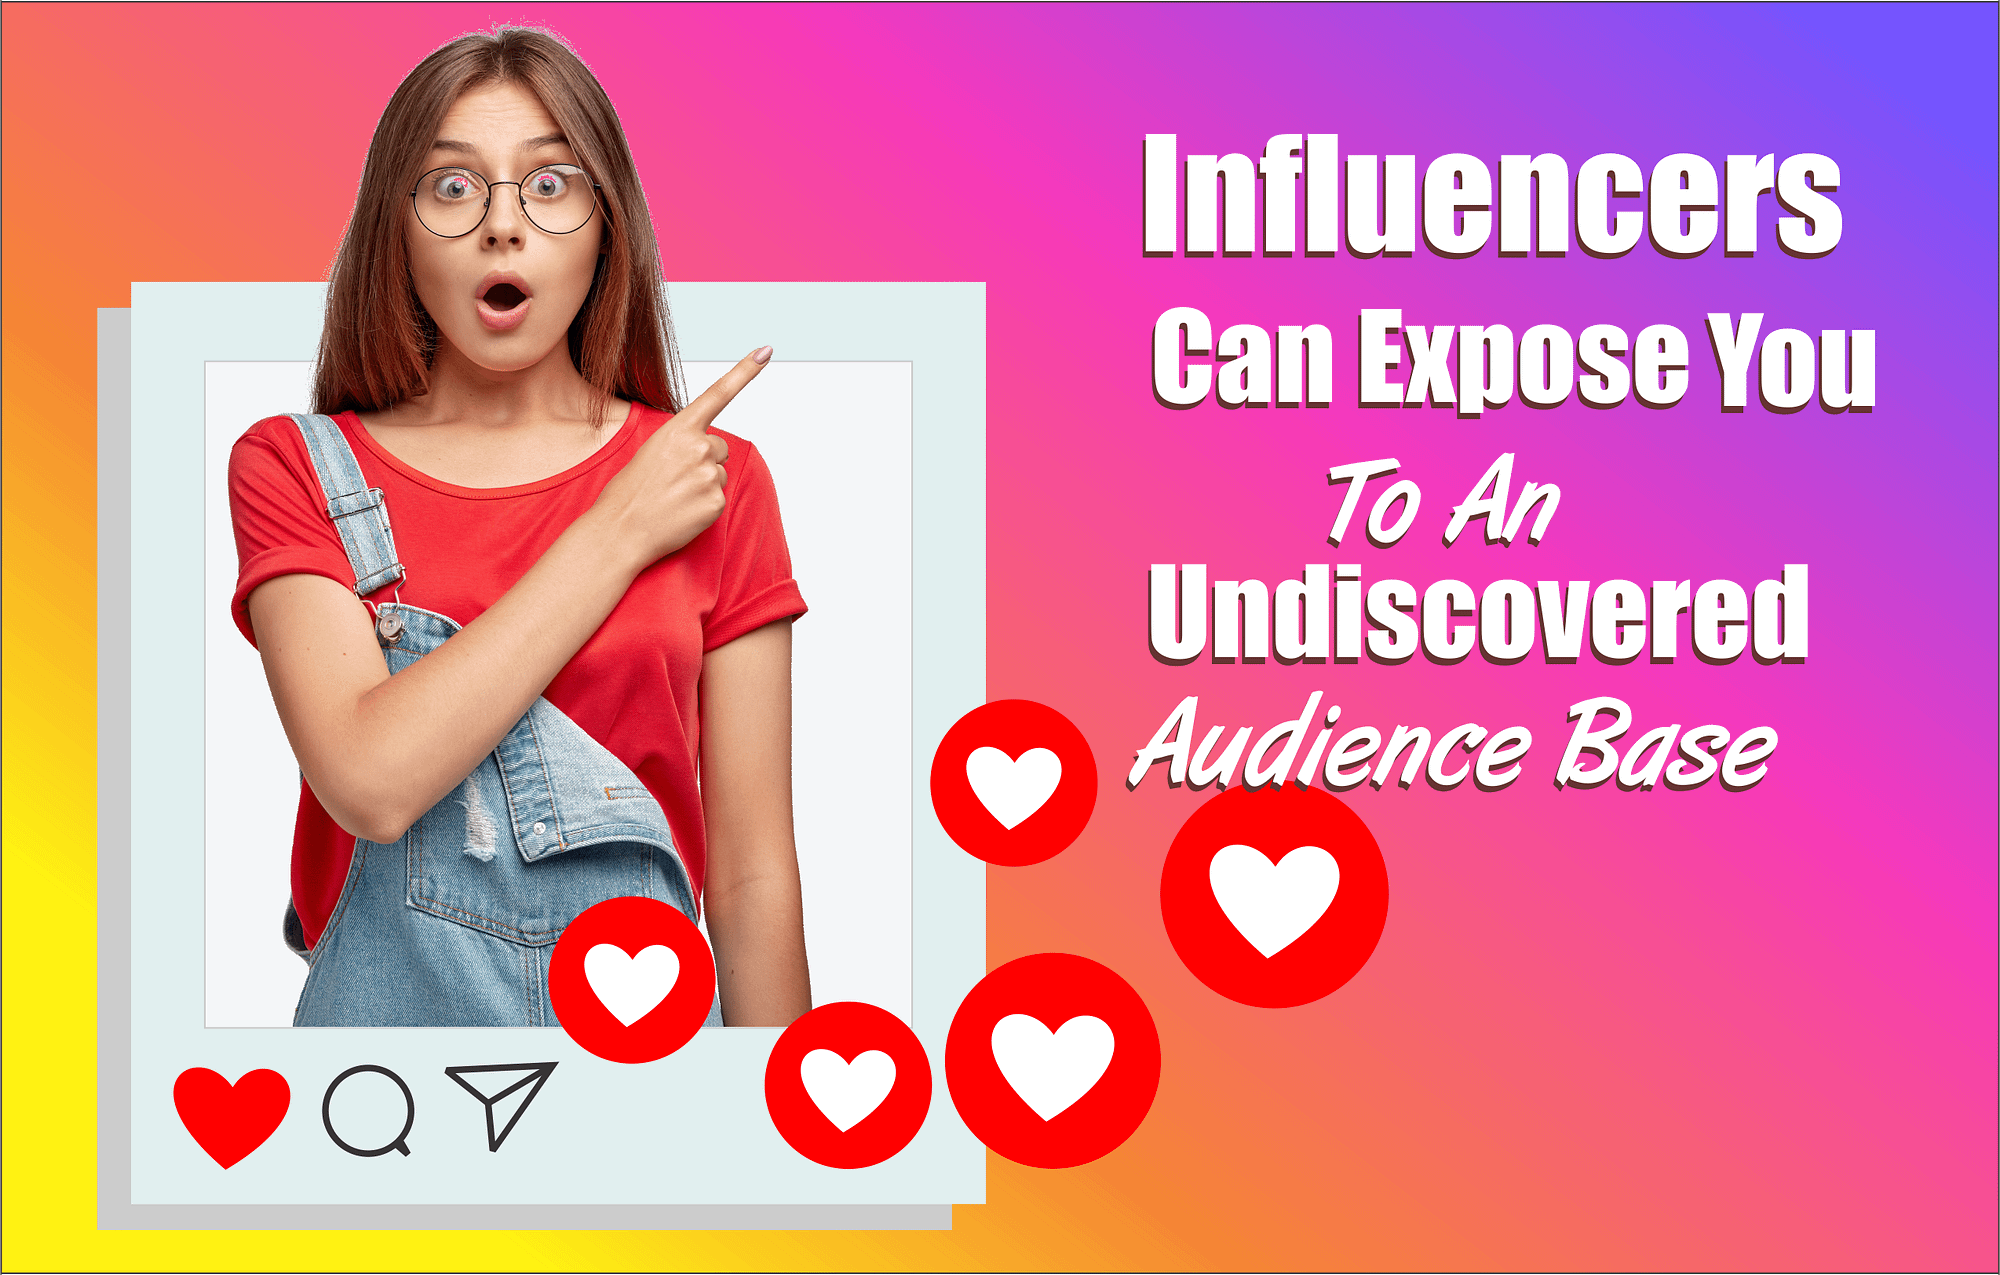 influencers can expose you to an undiscovered audience base